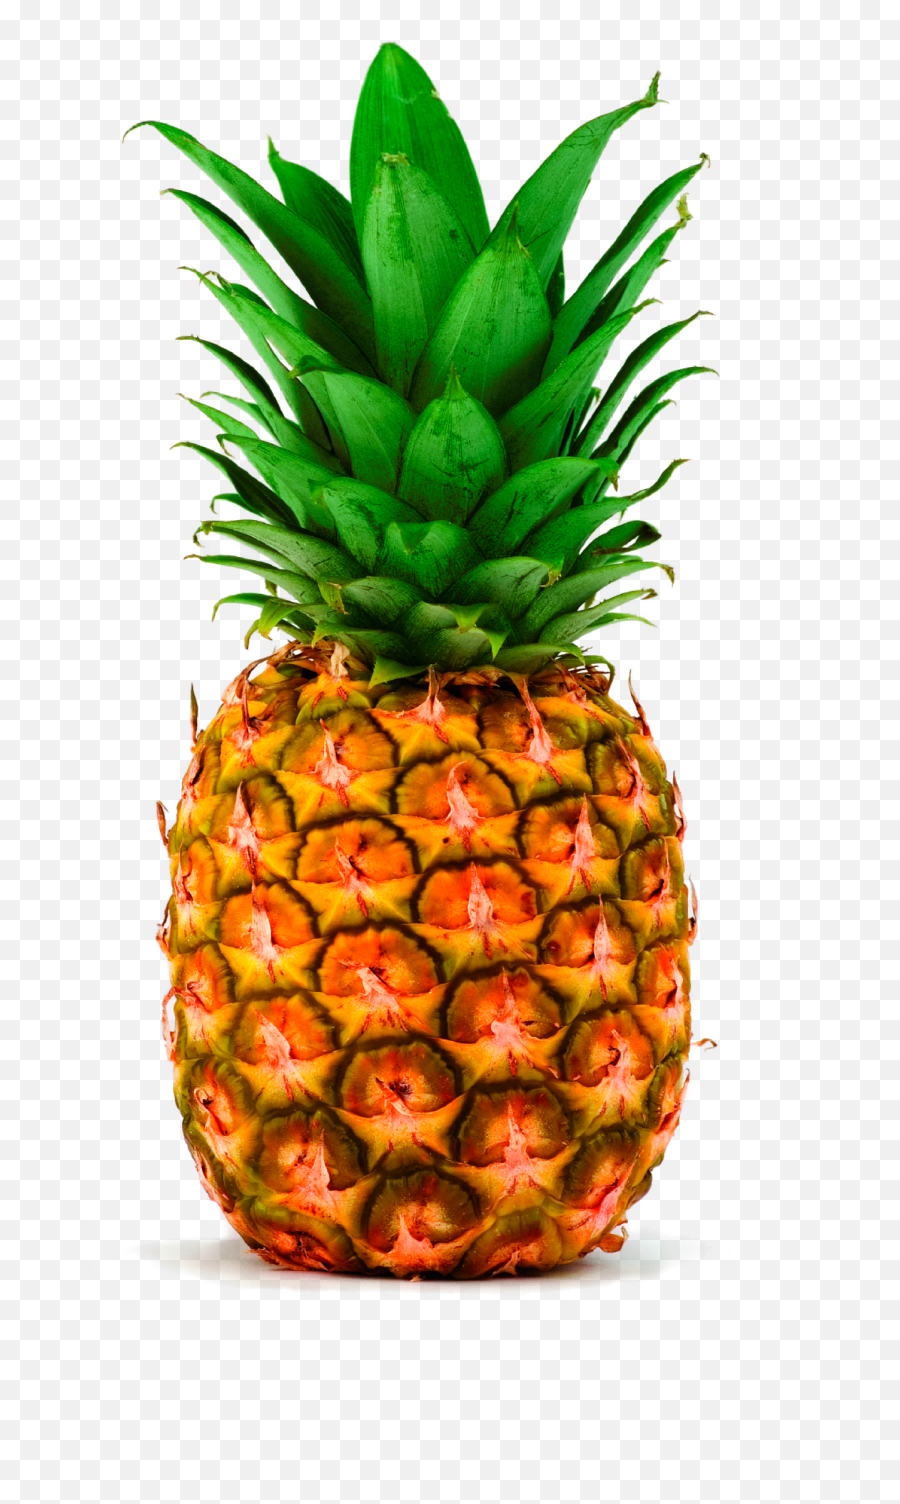 Pineapple Png Hd Image Free Download - Transparent Pineapple,Pineapple Transparent Background